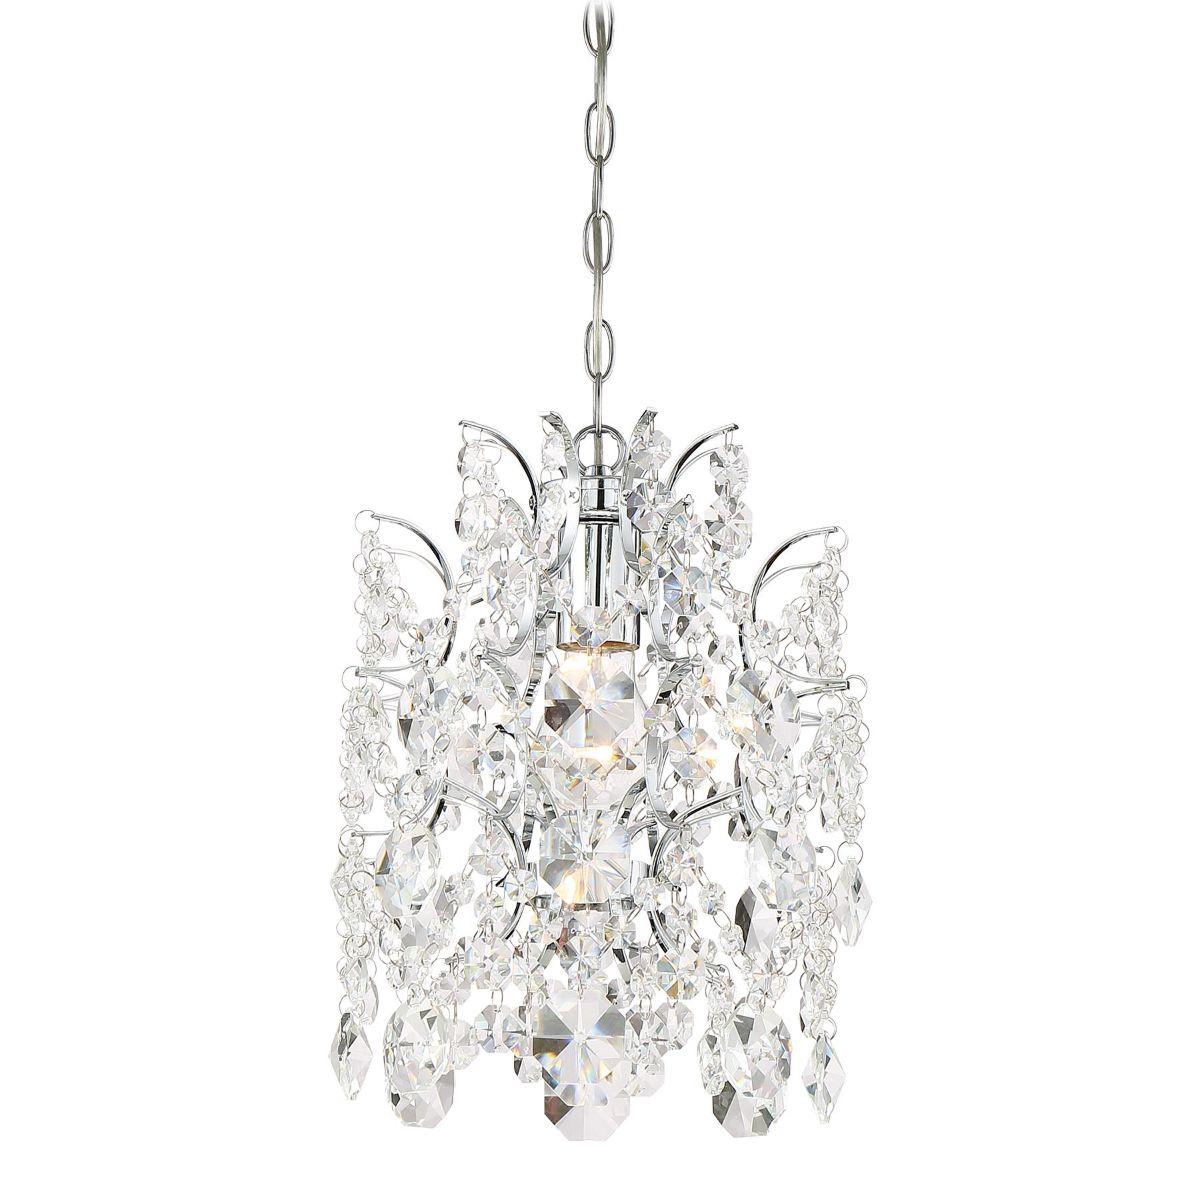 Isabella's Crown 10 in. Pendant Light Chrome Finish